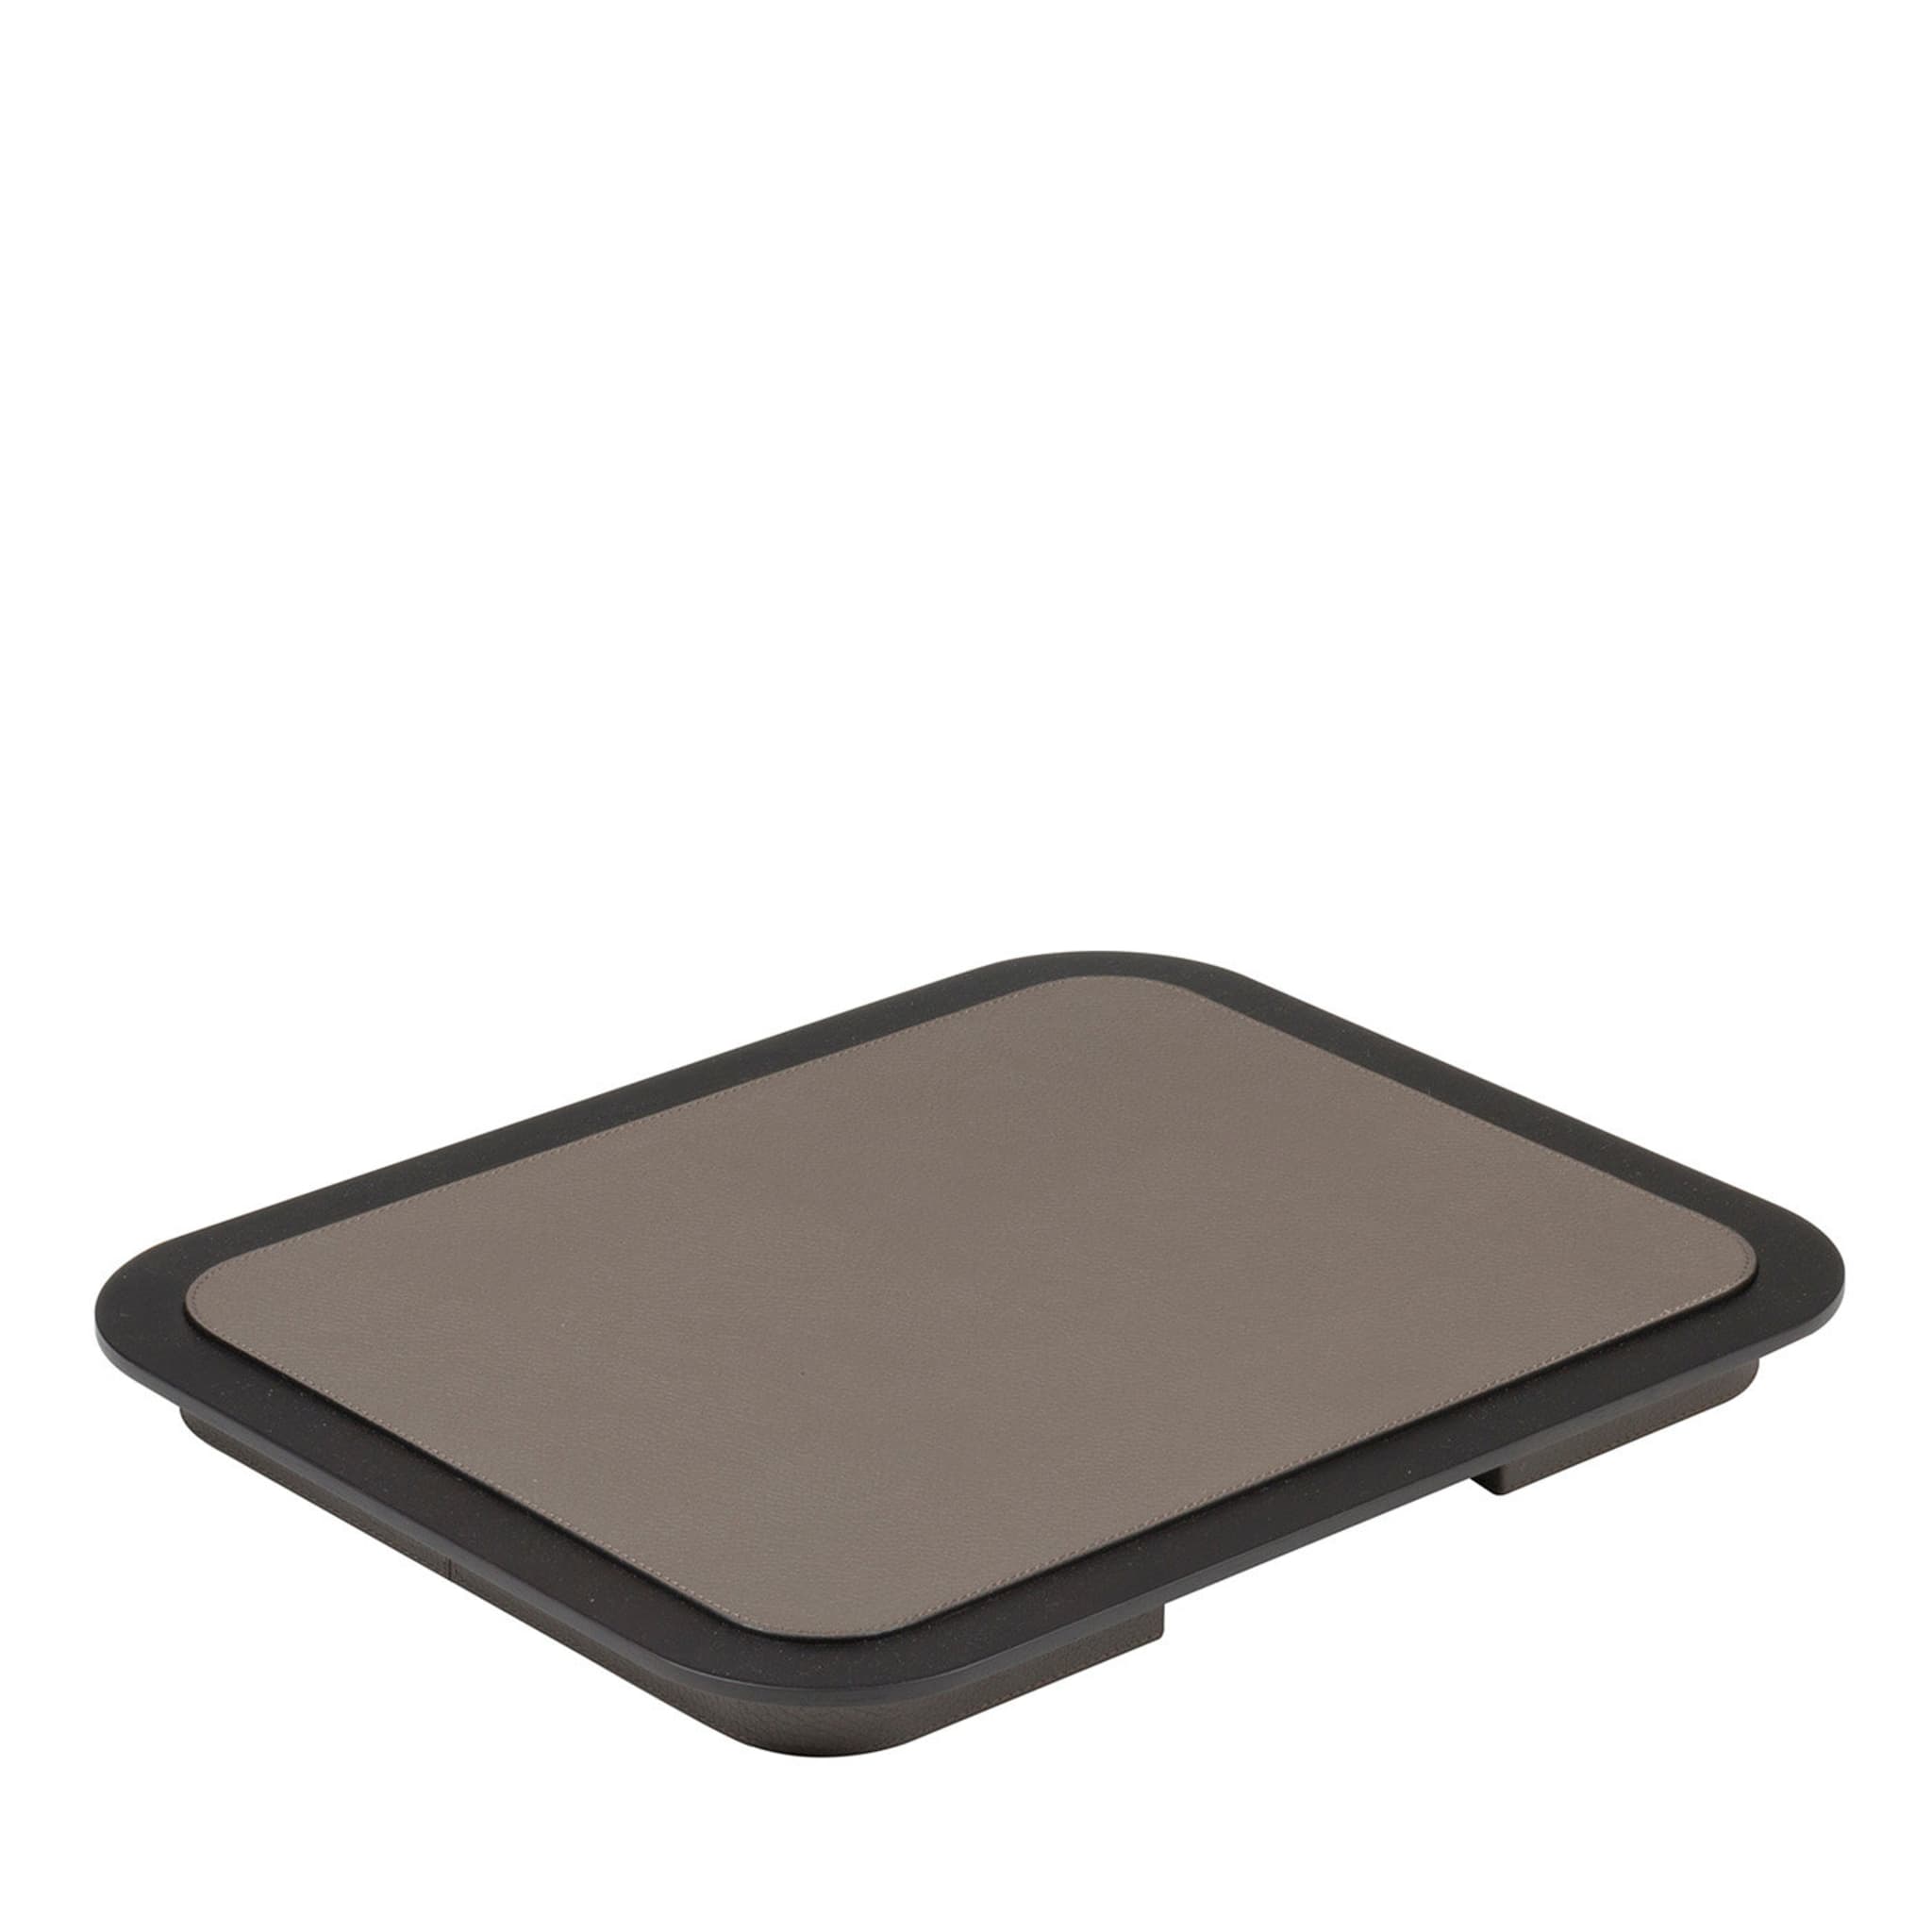 Lloyd Rectangular Tray N. 3 in Taupe and Wenge - Main view